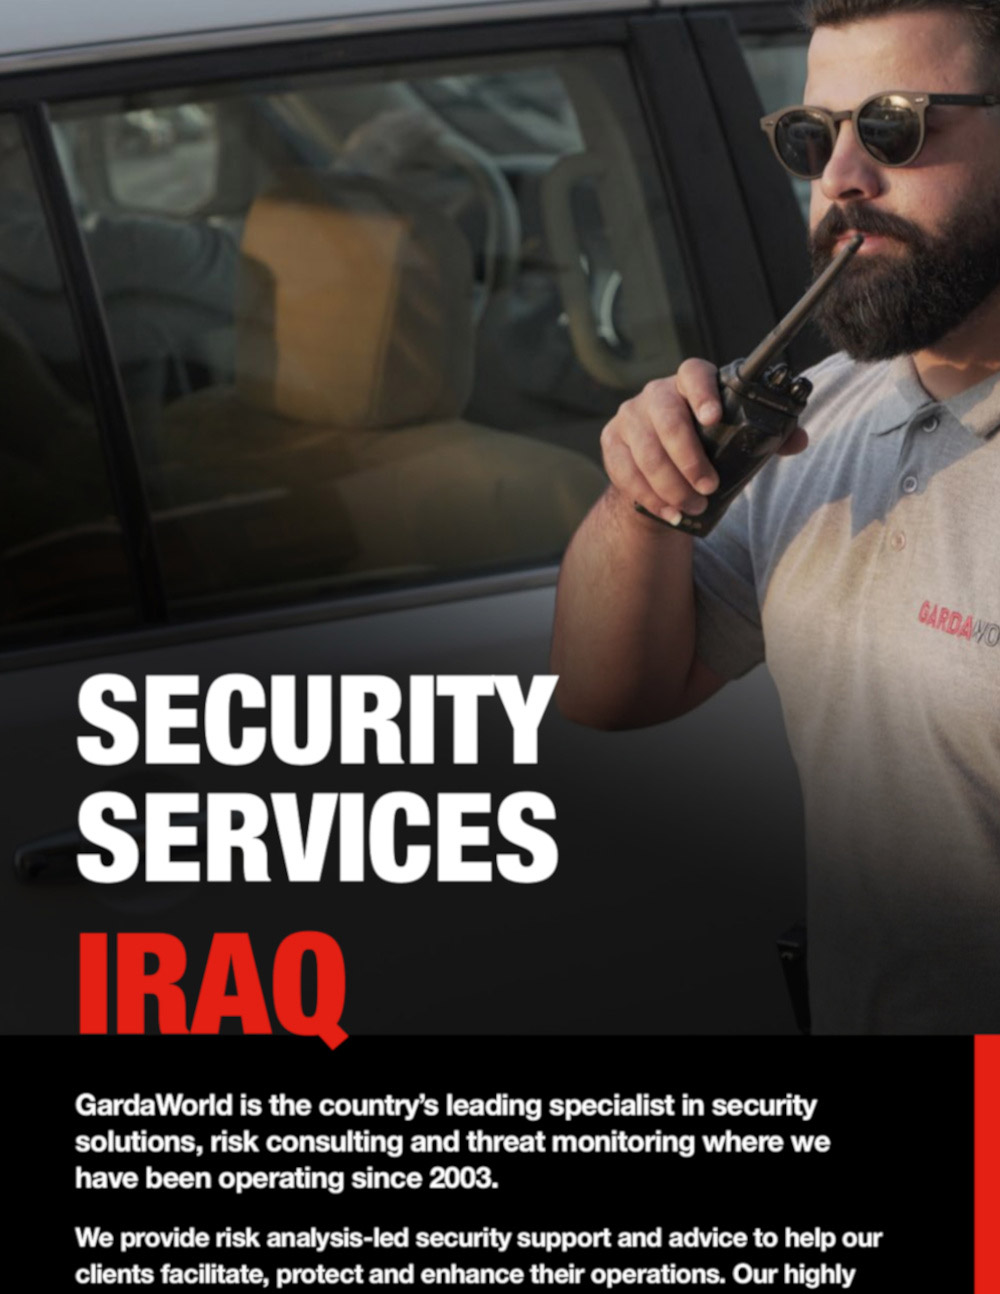 Capability sheet - Iraq security services